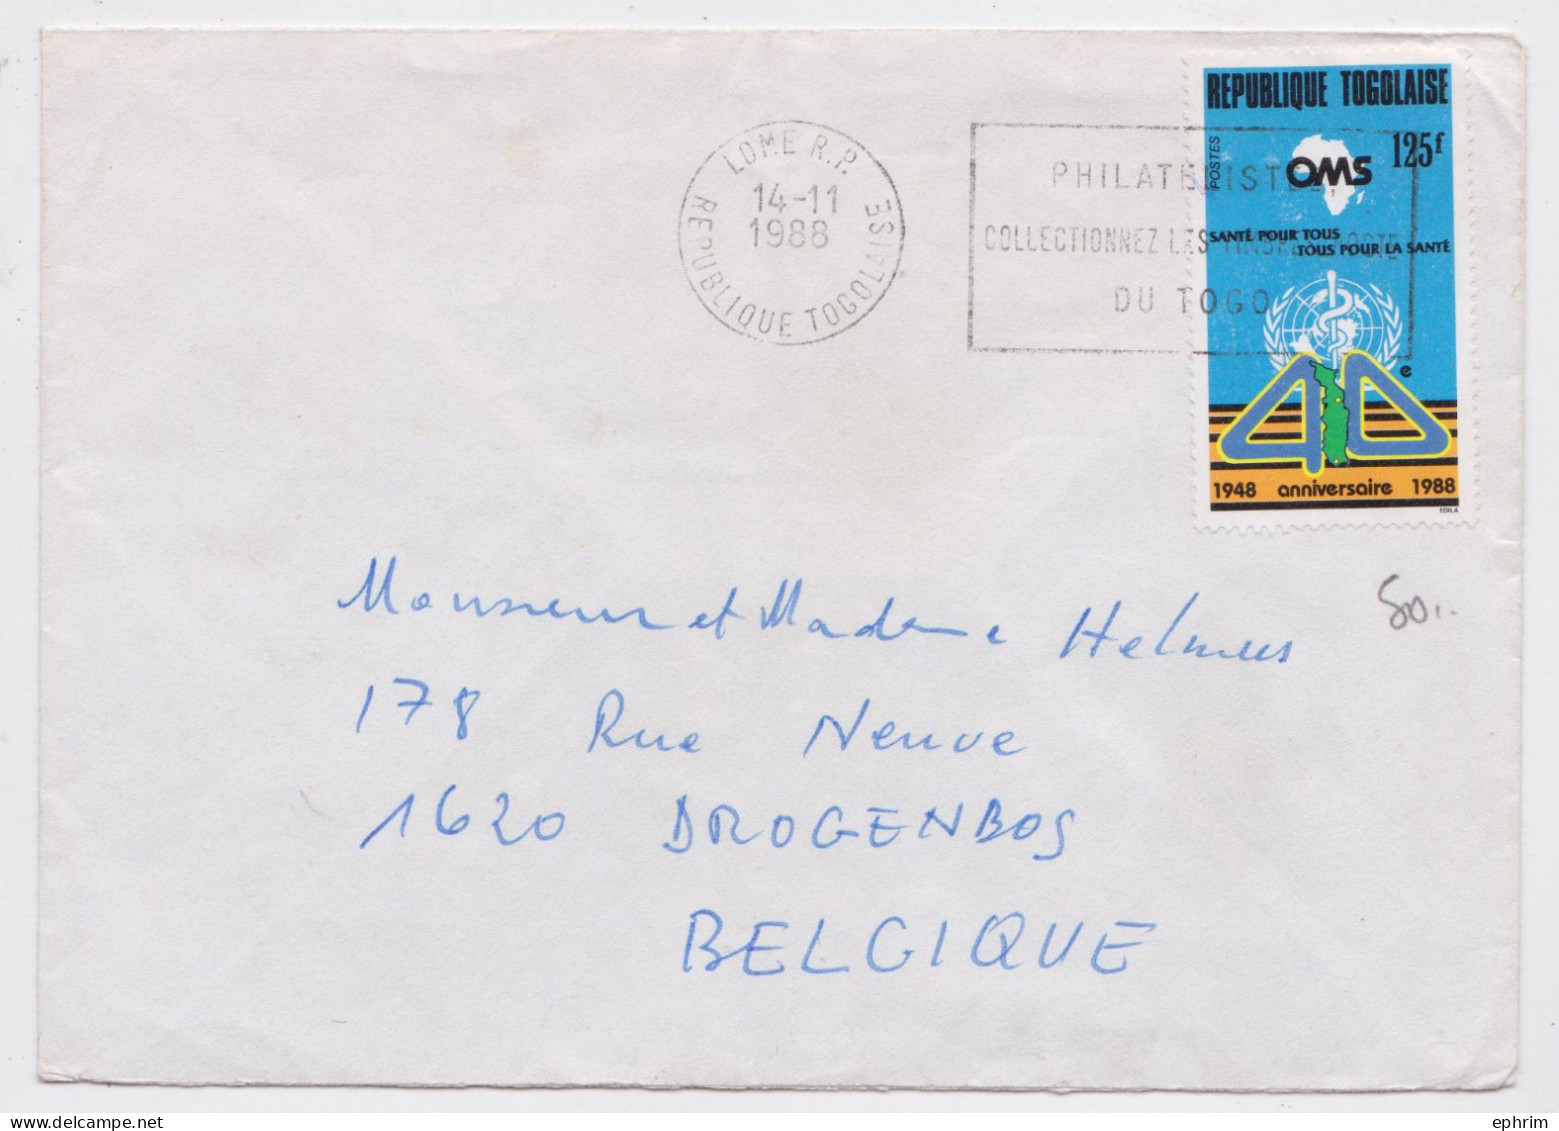 Togo Lettre Flamme Timbre OMS Stamp Air Mail Cover 1988 - Togo (1960-...)